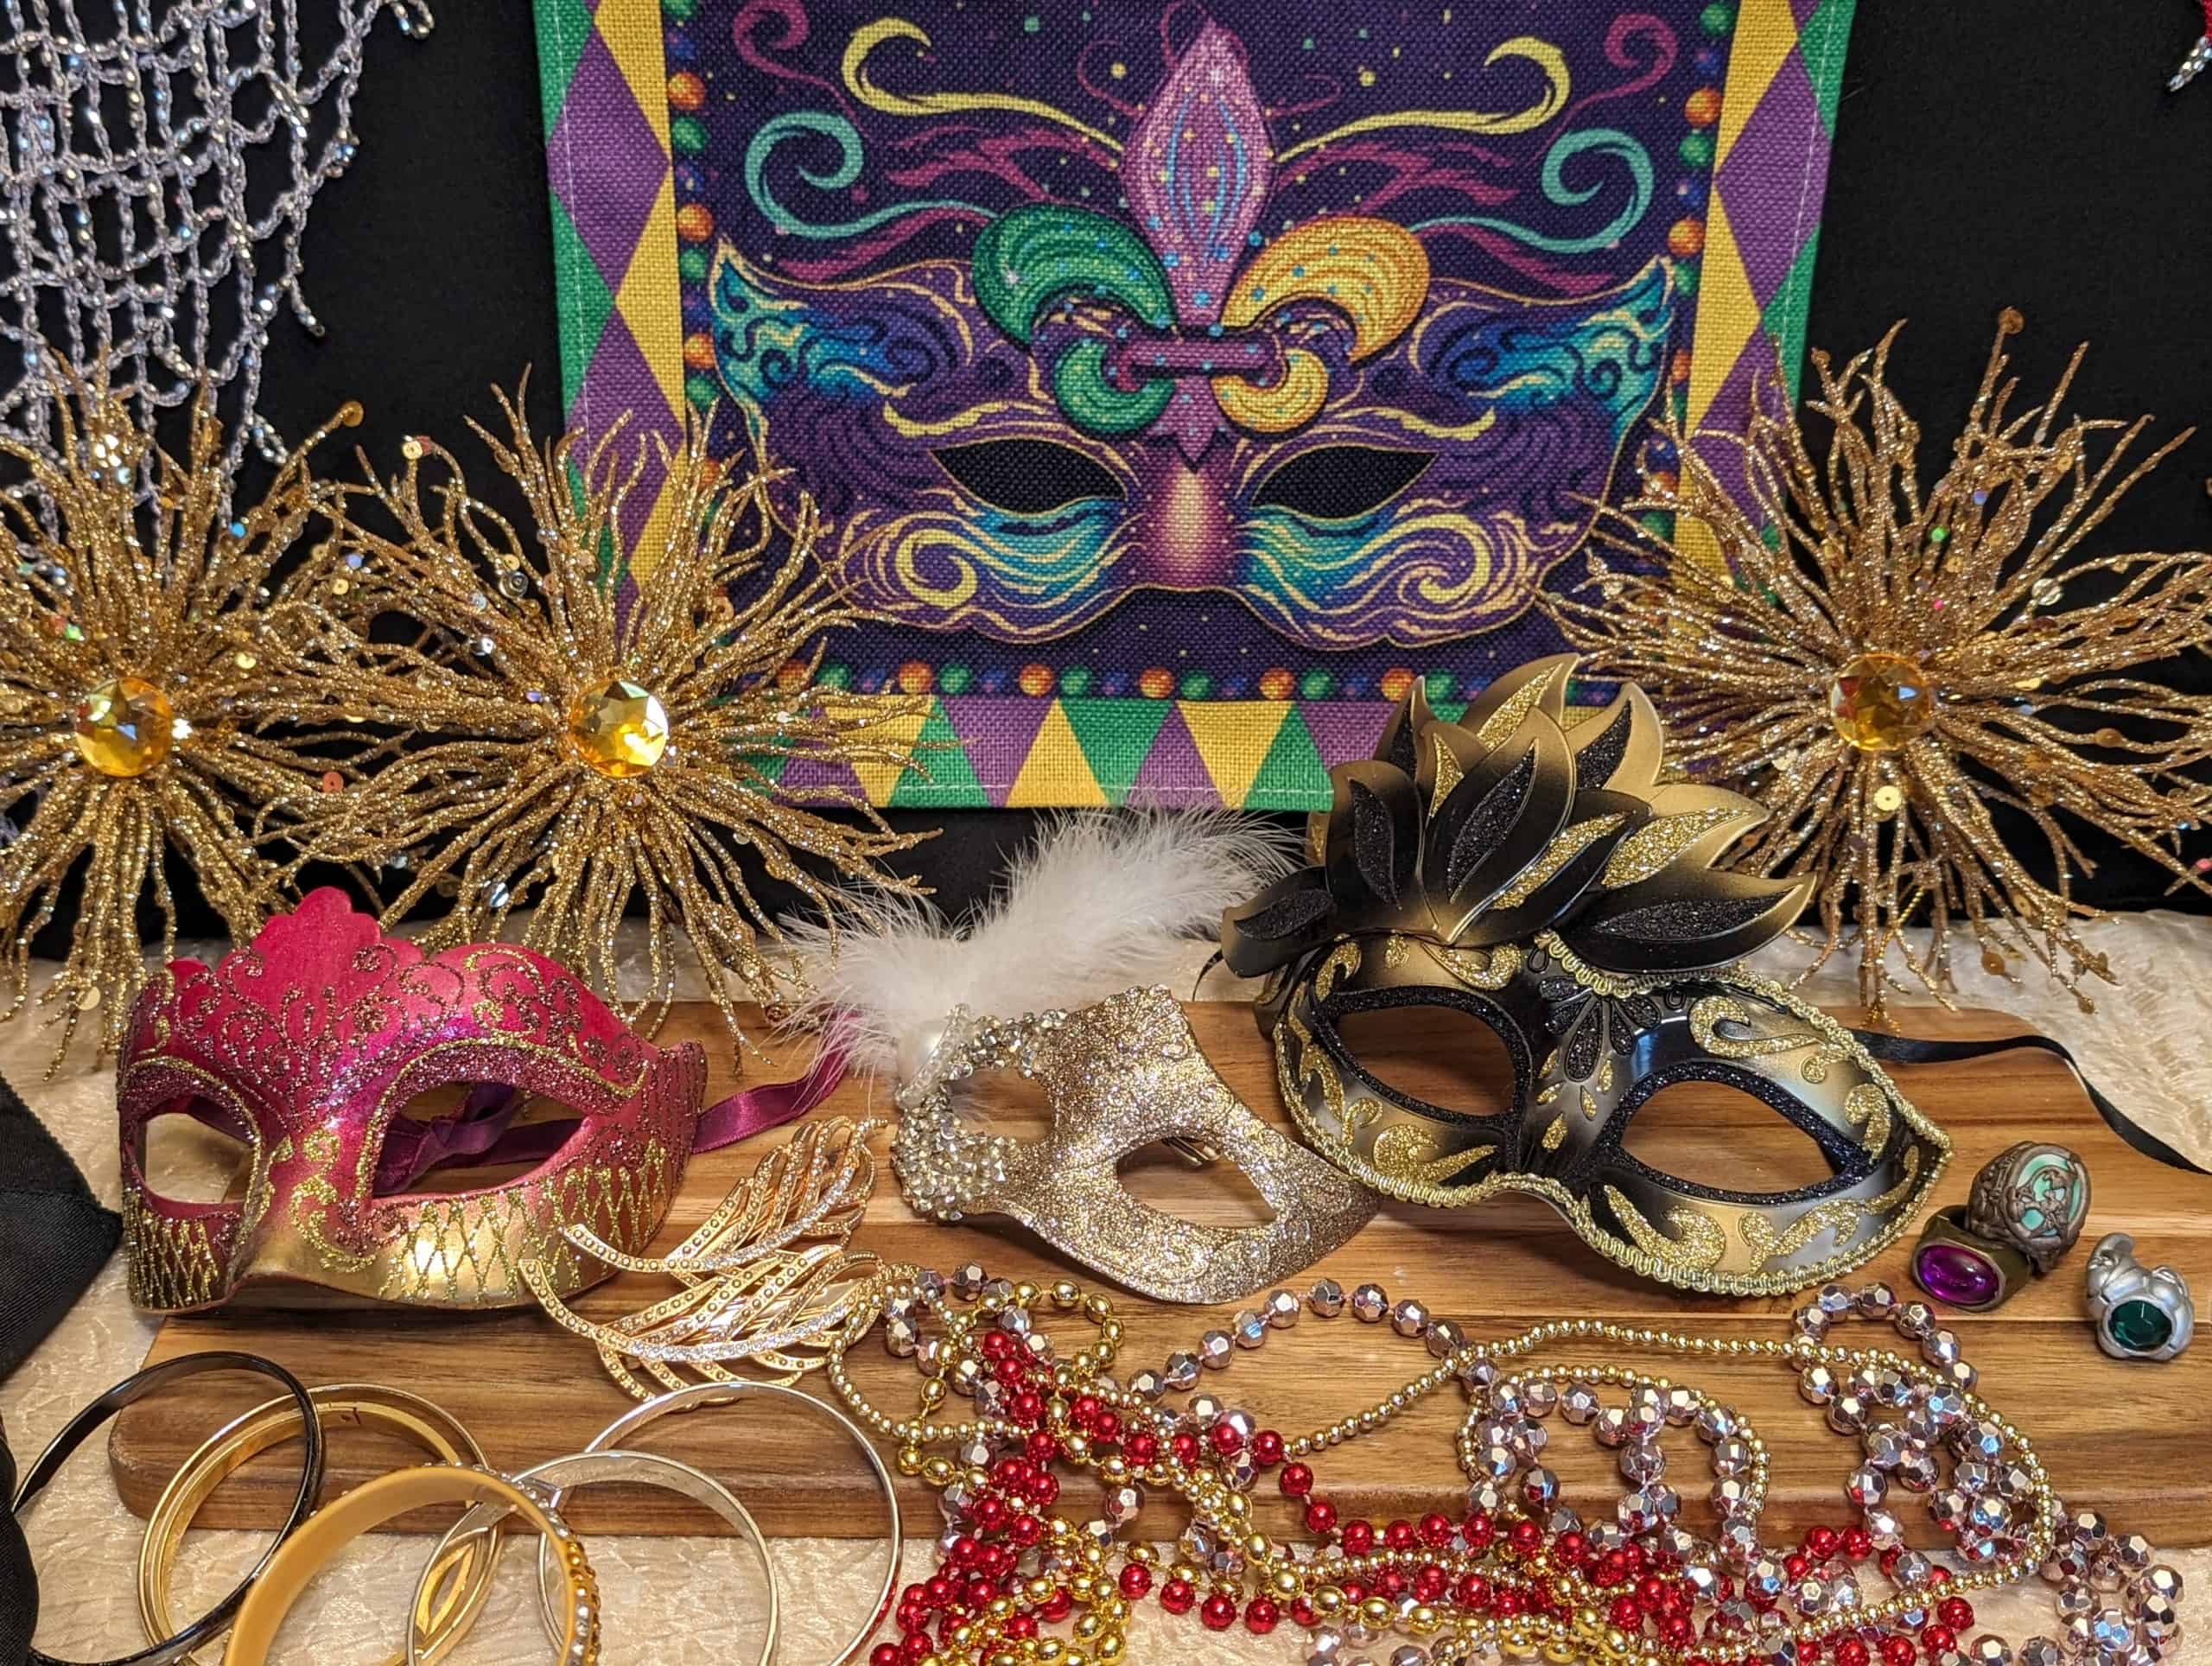 Mardi Gras Dinner Party Display with masks, beaded necklaces, shiny bracelets, and rings